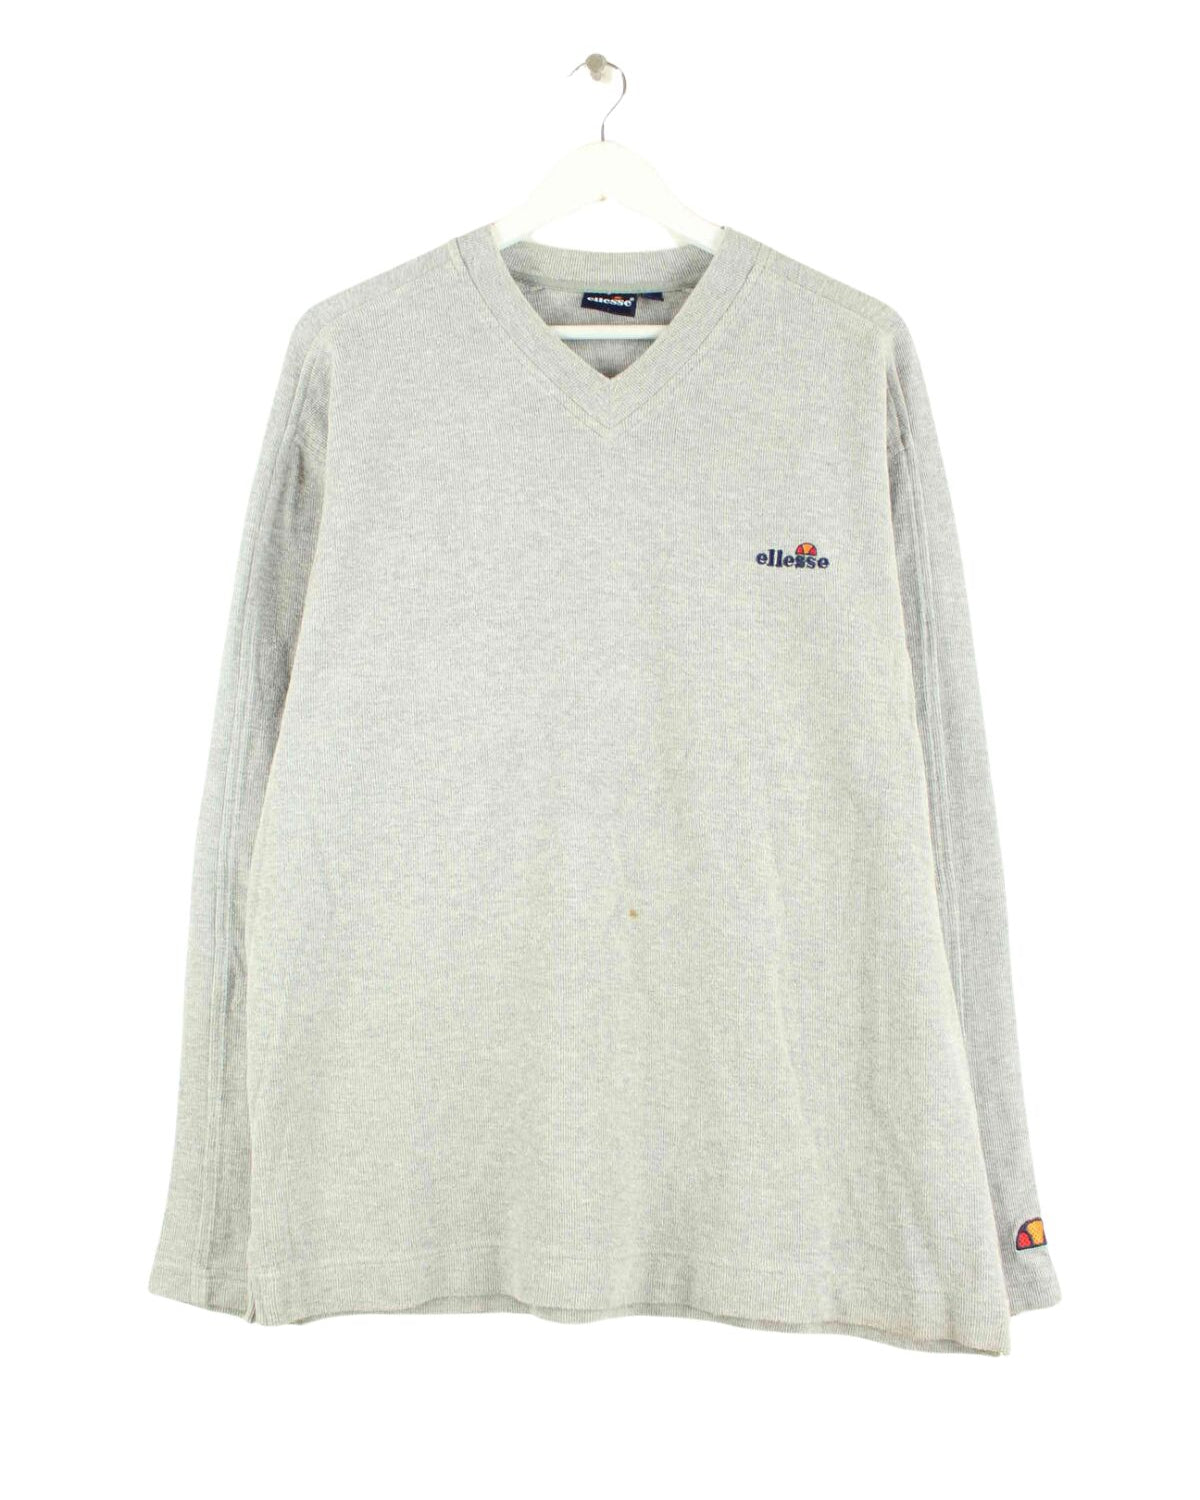 Ellesse Embroidered Sweater Grau L (front image)